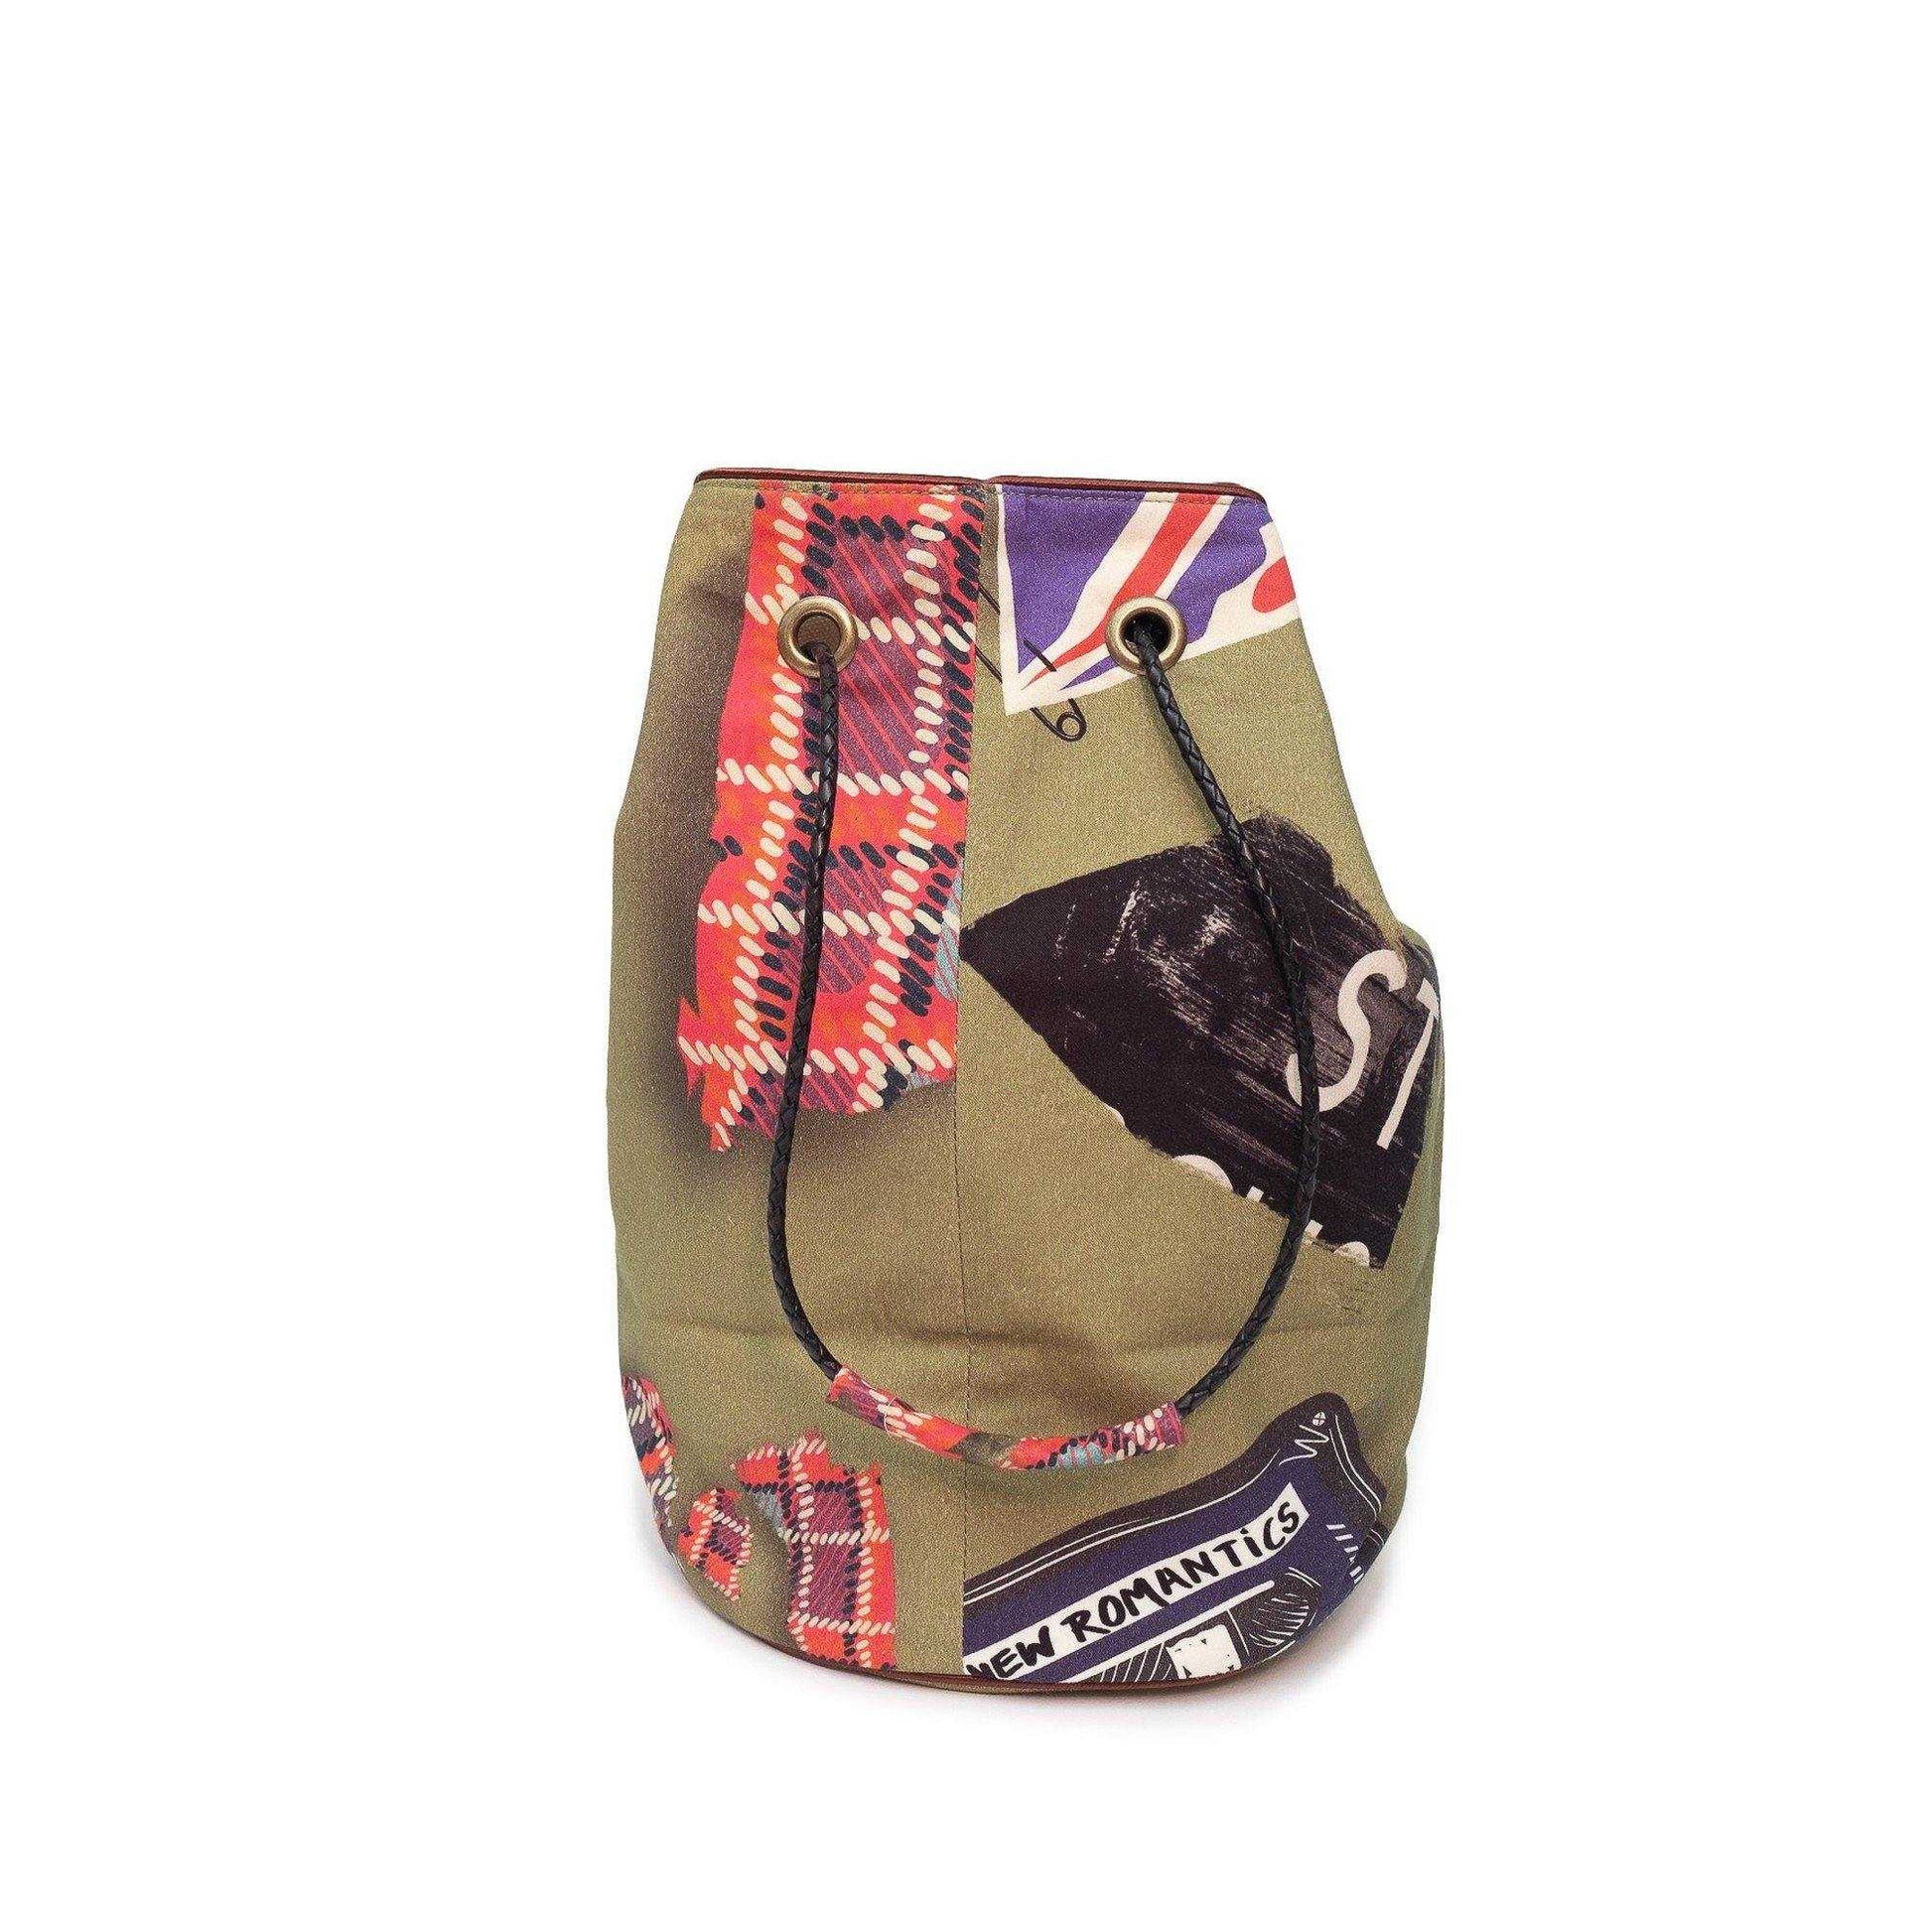 In Japan Organic Cotton bucket bag 'Stick the kettle on!'